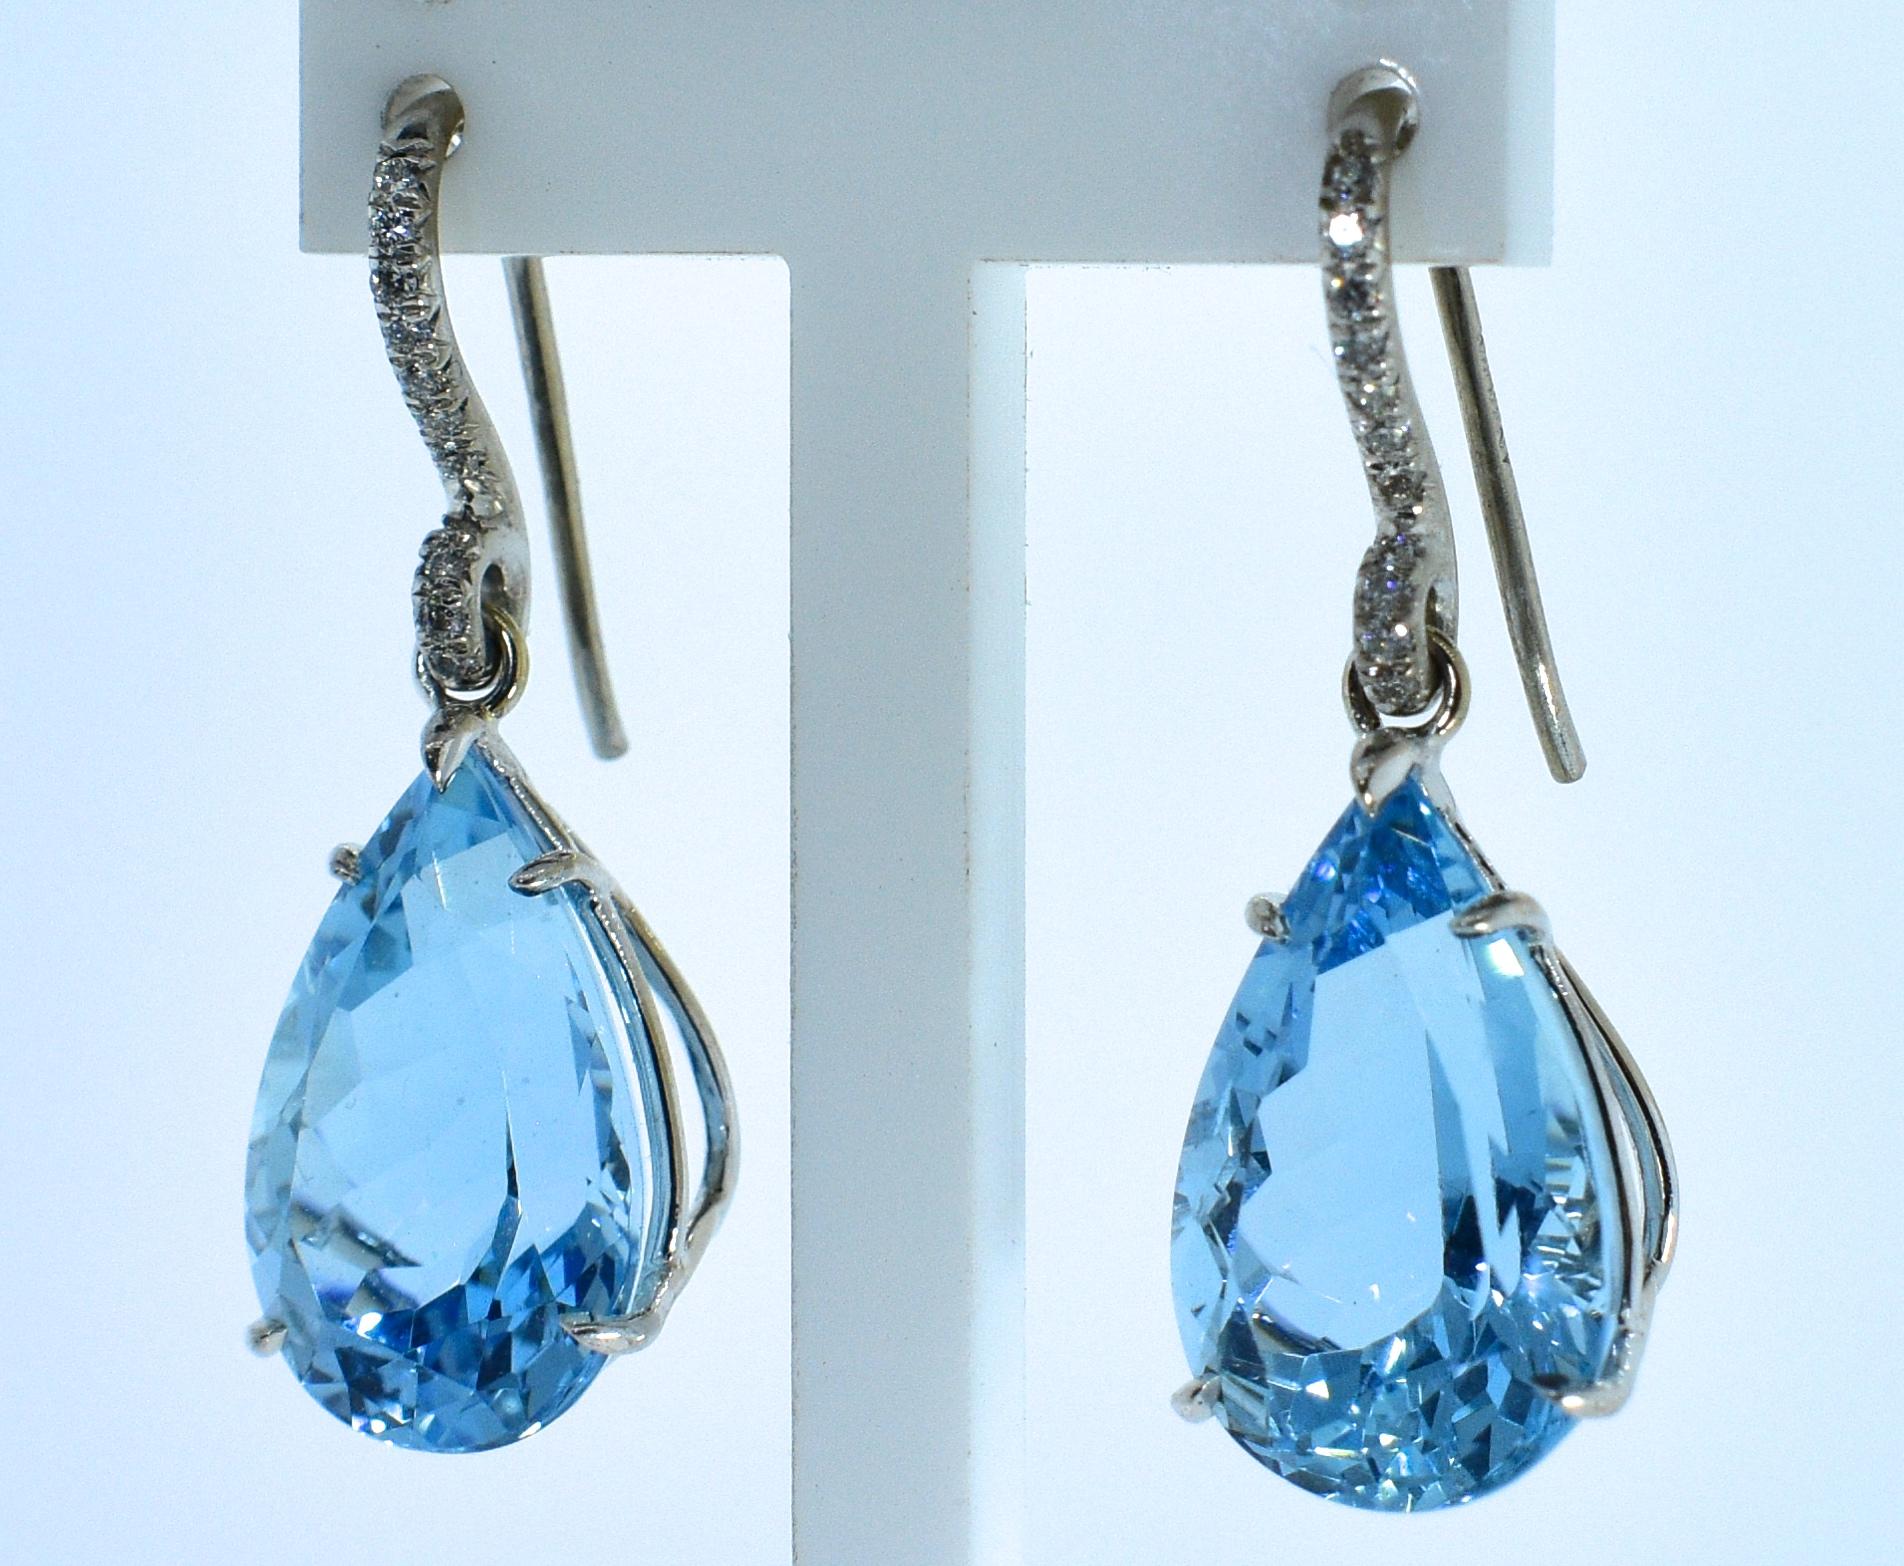 Contemporary Aquamarine and Diamond Earrings in 18 Karat by Mish, New York